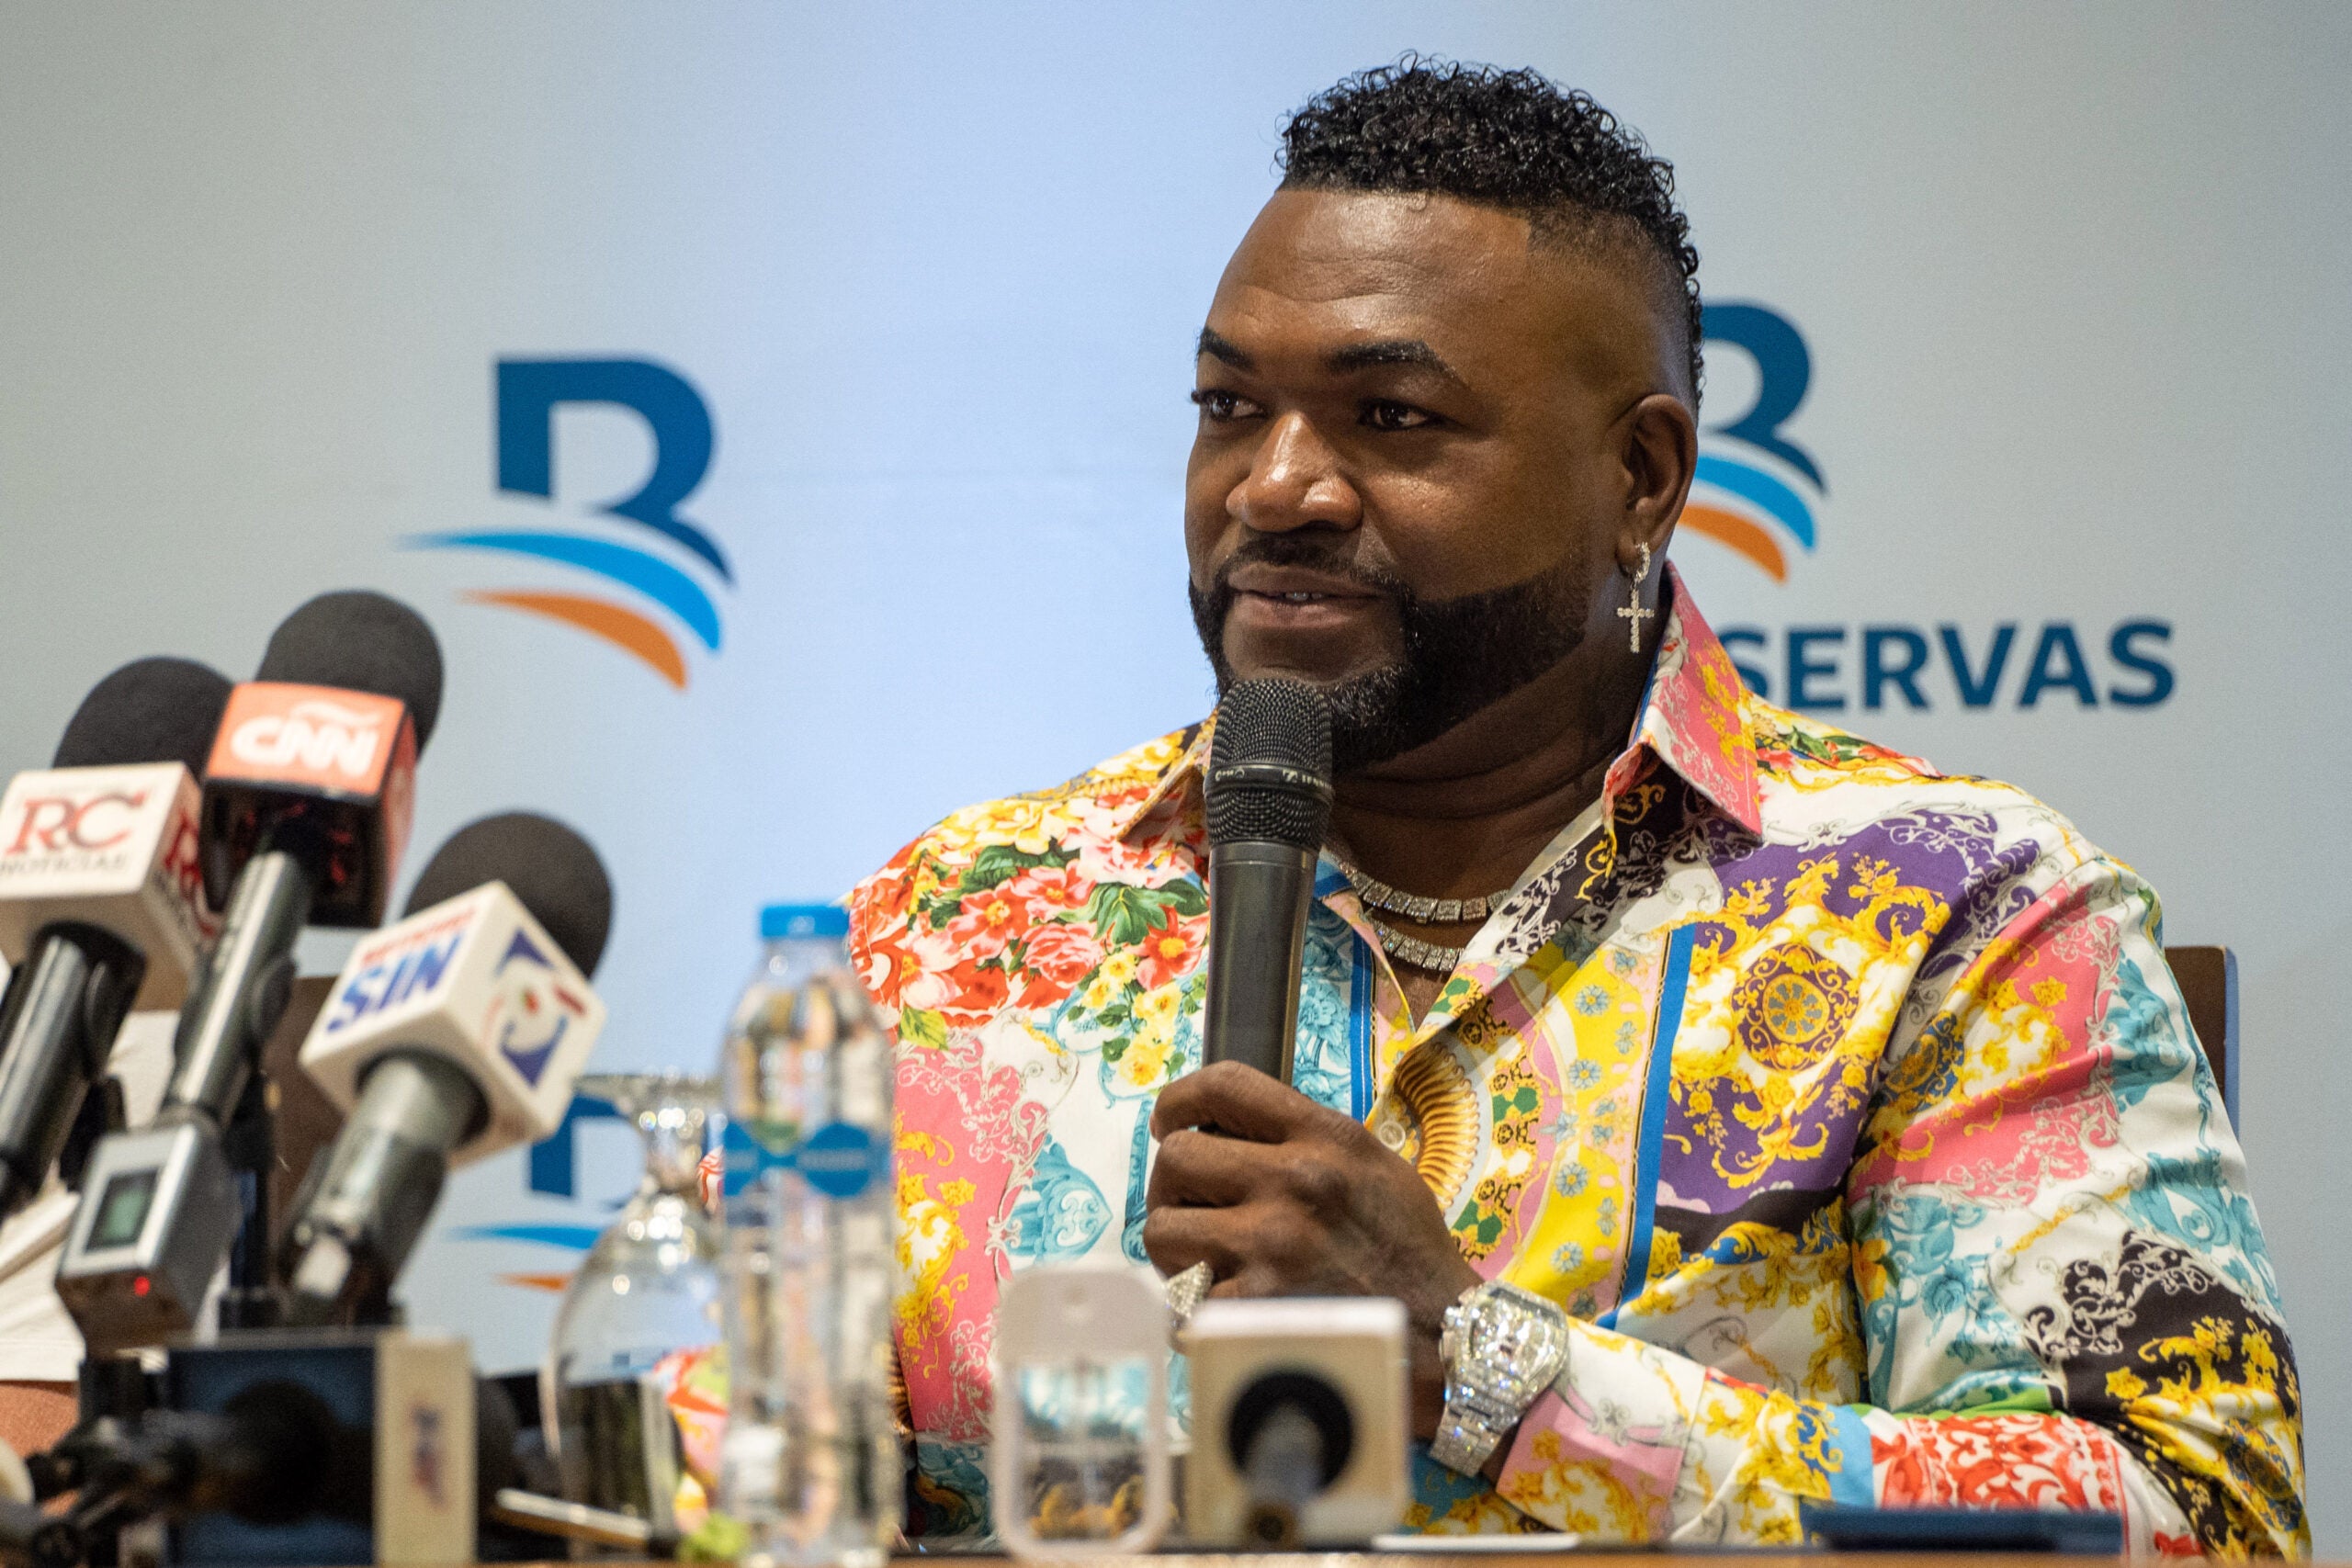 David Ortiz's Hall of Fame case: Red Sox hero Big Papi has steroid stain